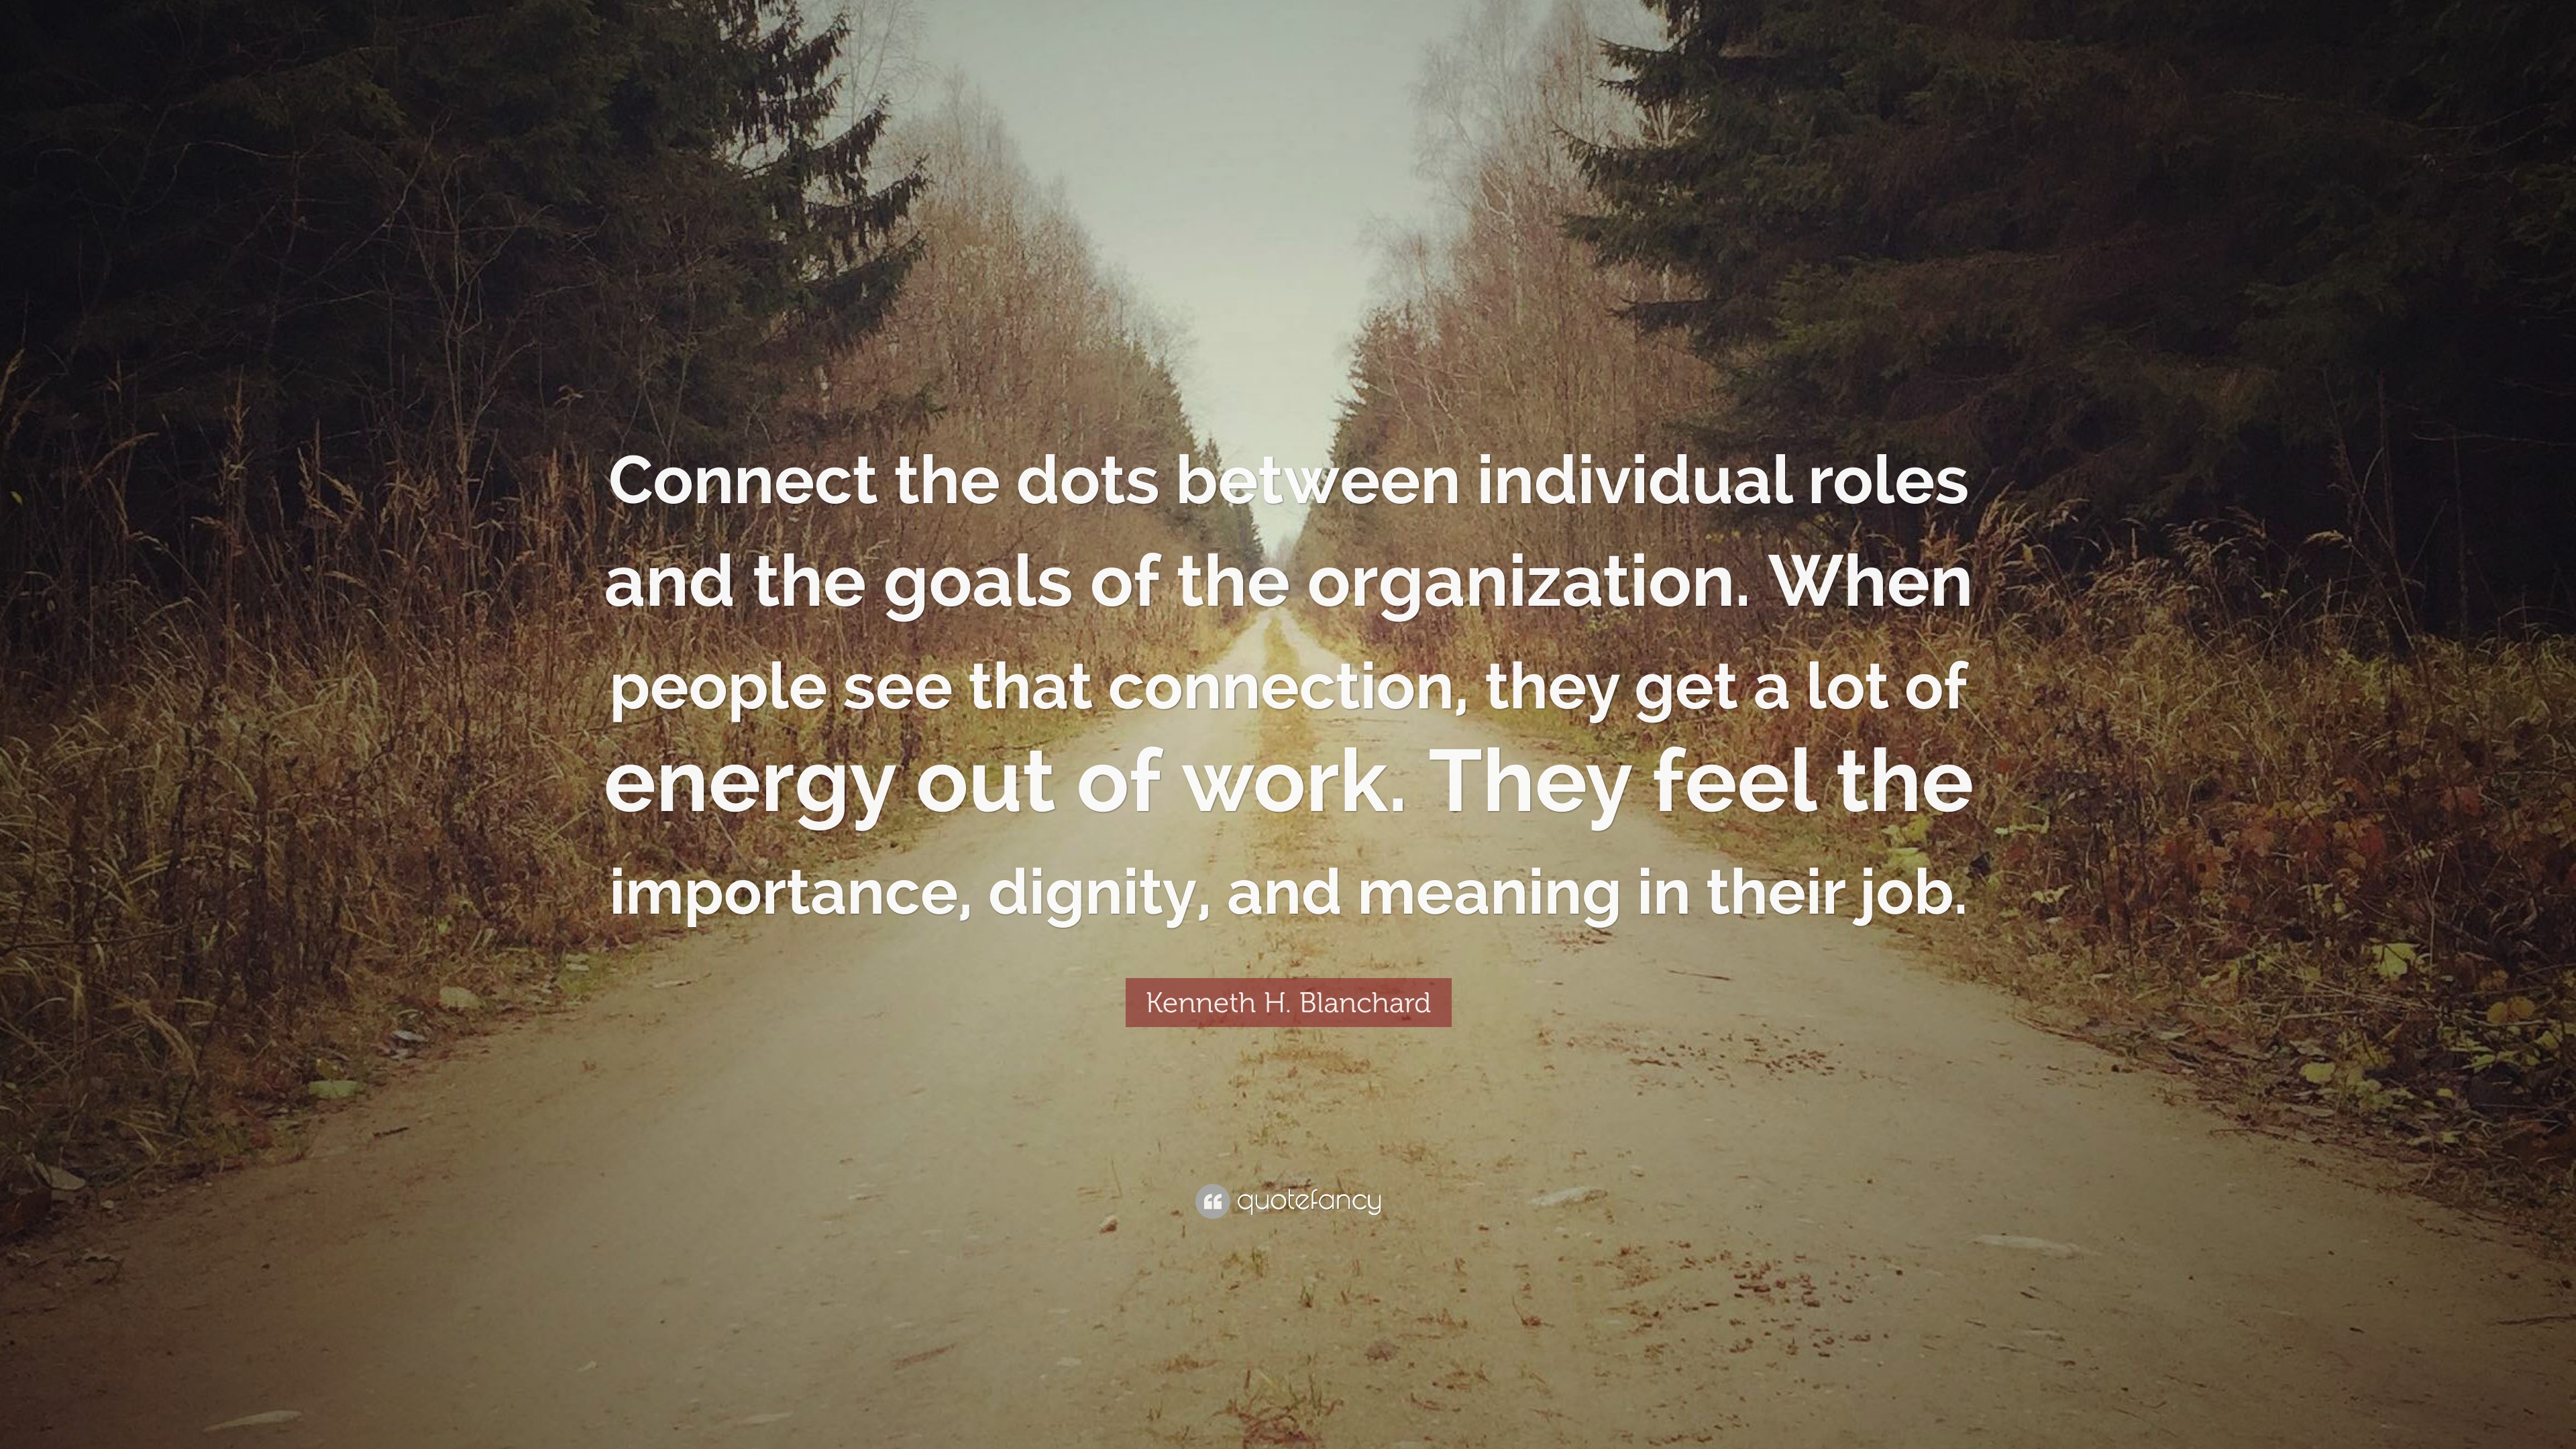 The importance of connecting dots